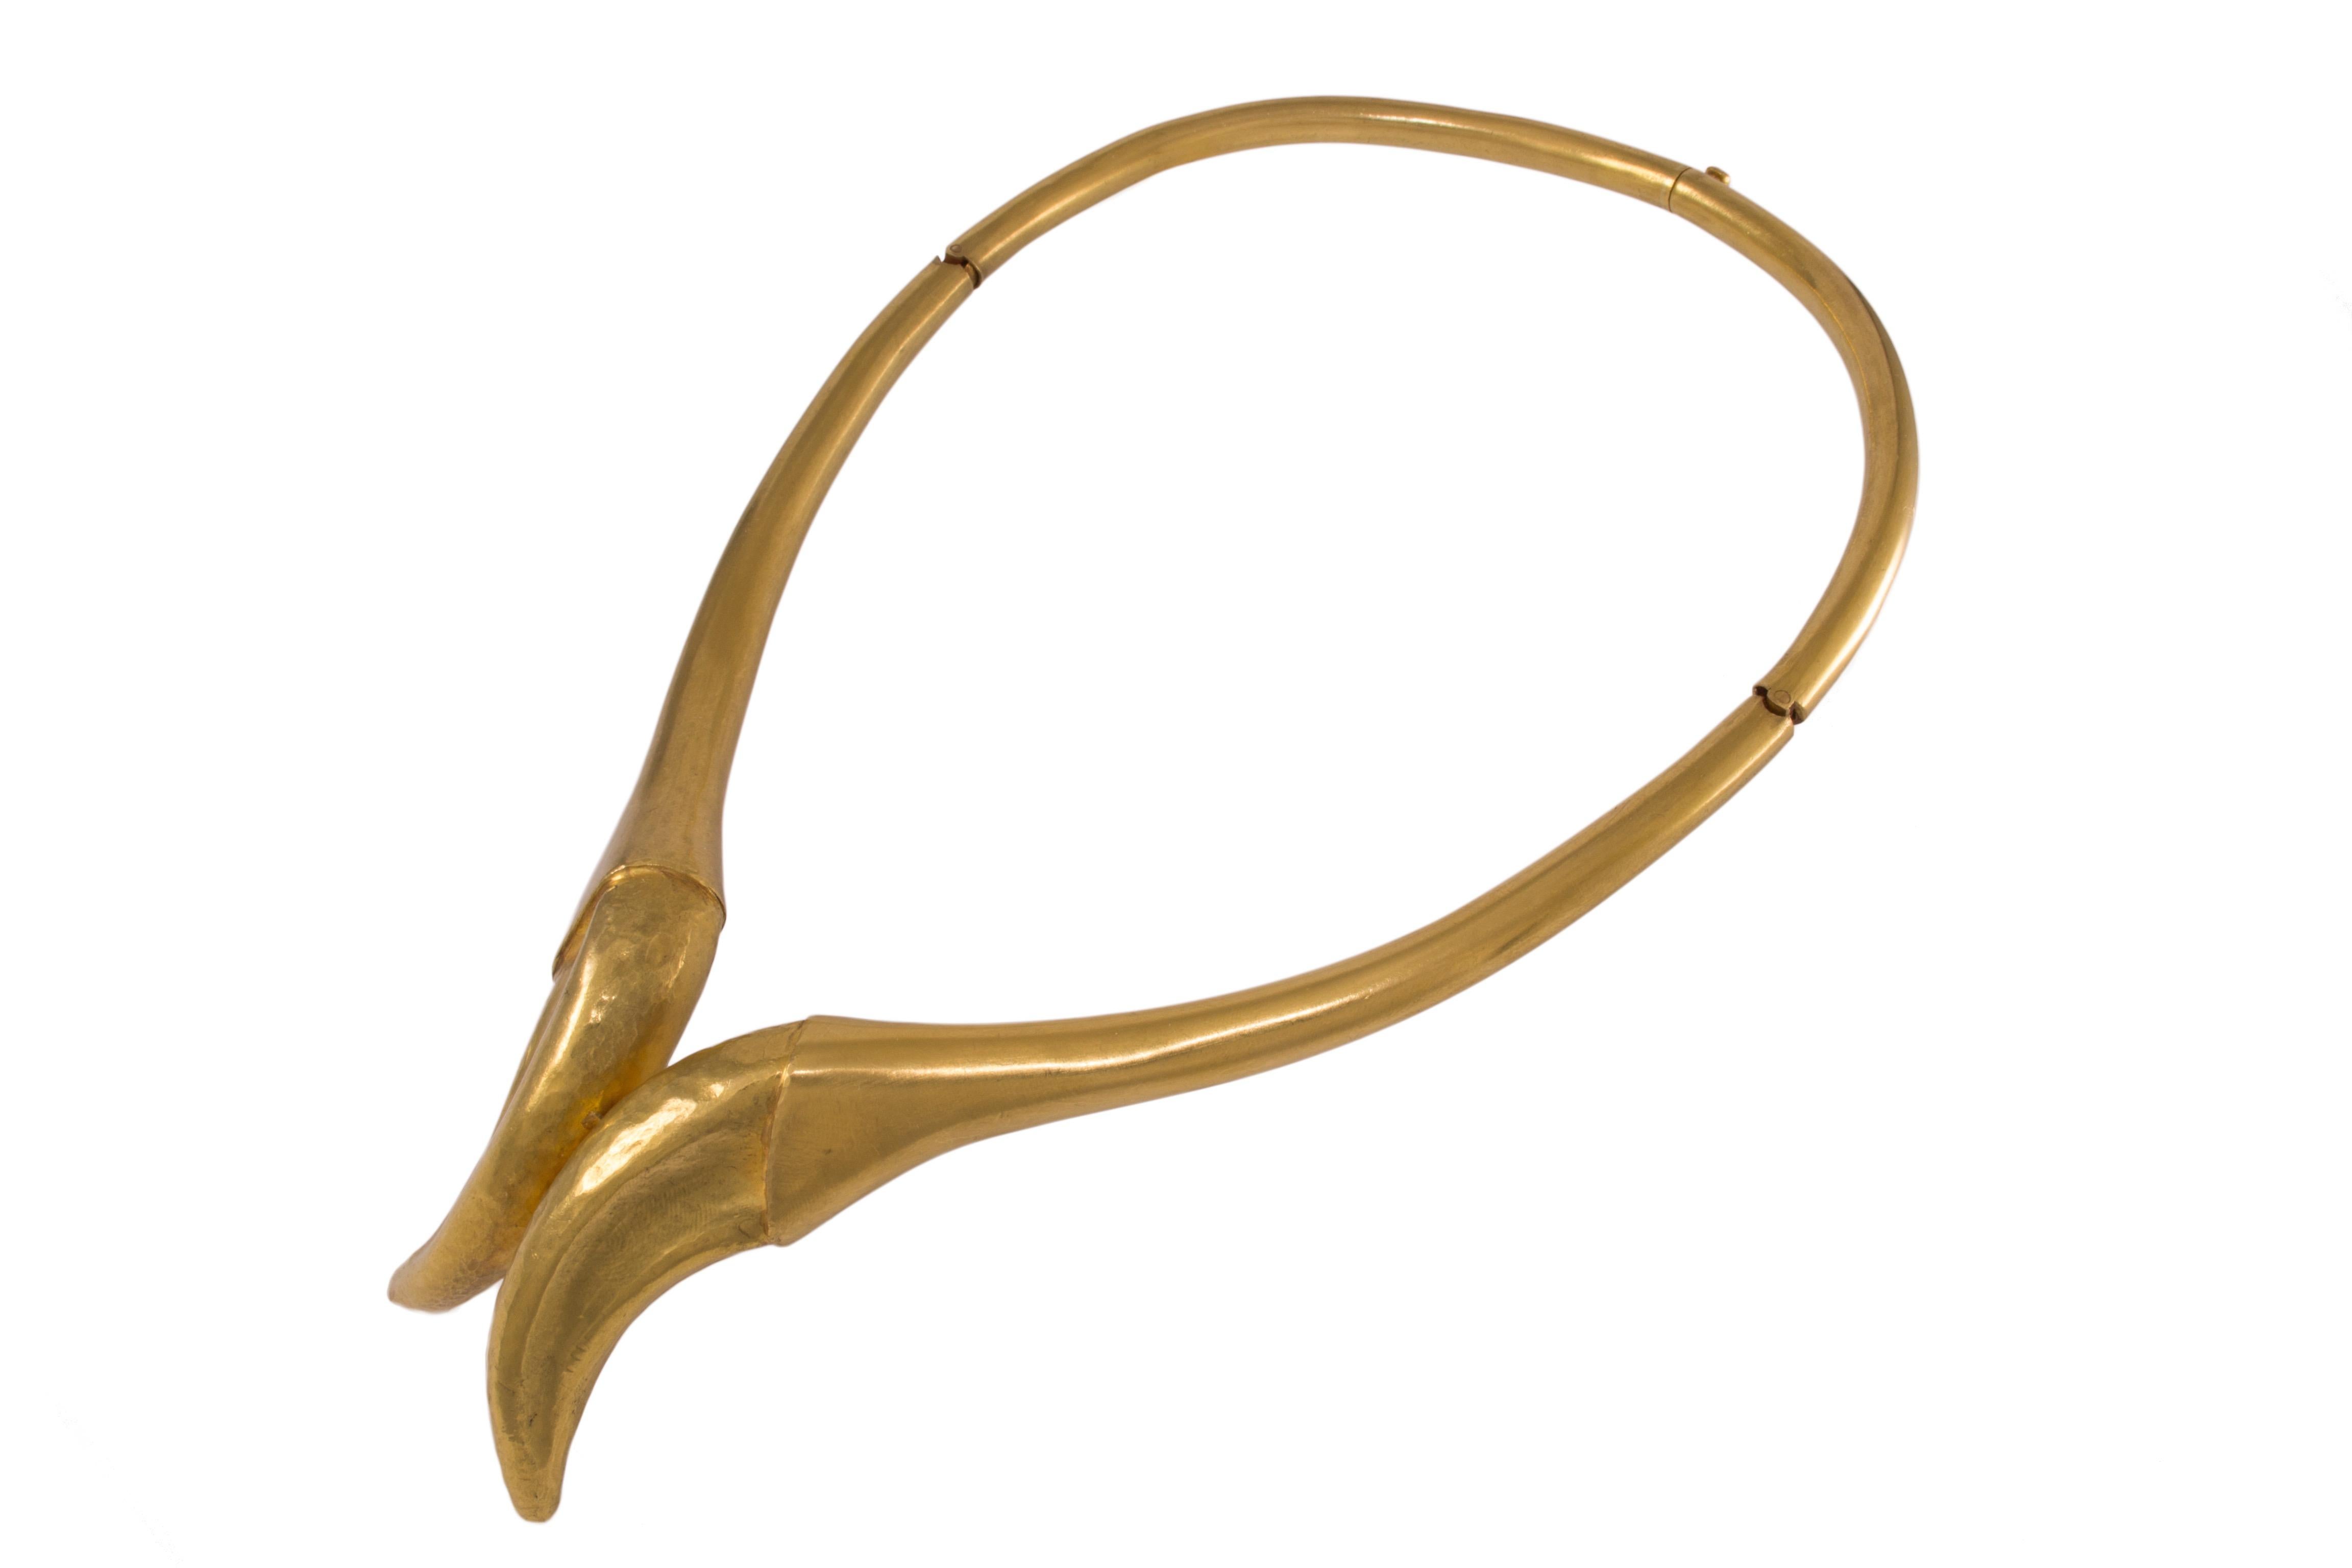 A 21 karat yellow gold claw double hinged collar from the Neolithic collection, by Ilias Lalaounis  c. 1970. Vintage jewelry. 

The collar has an internal circumference of 15.5